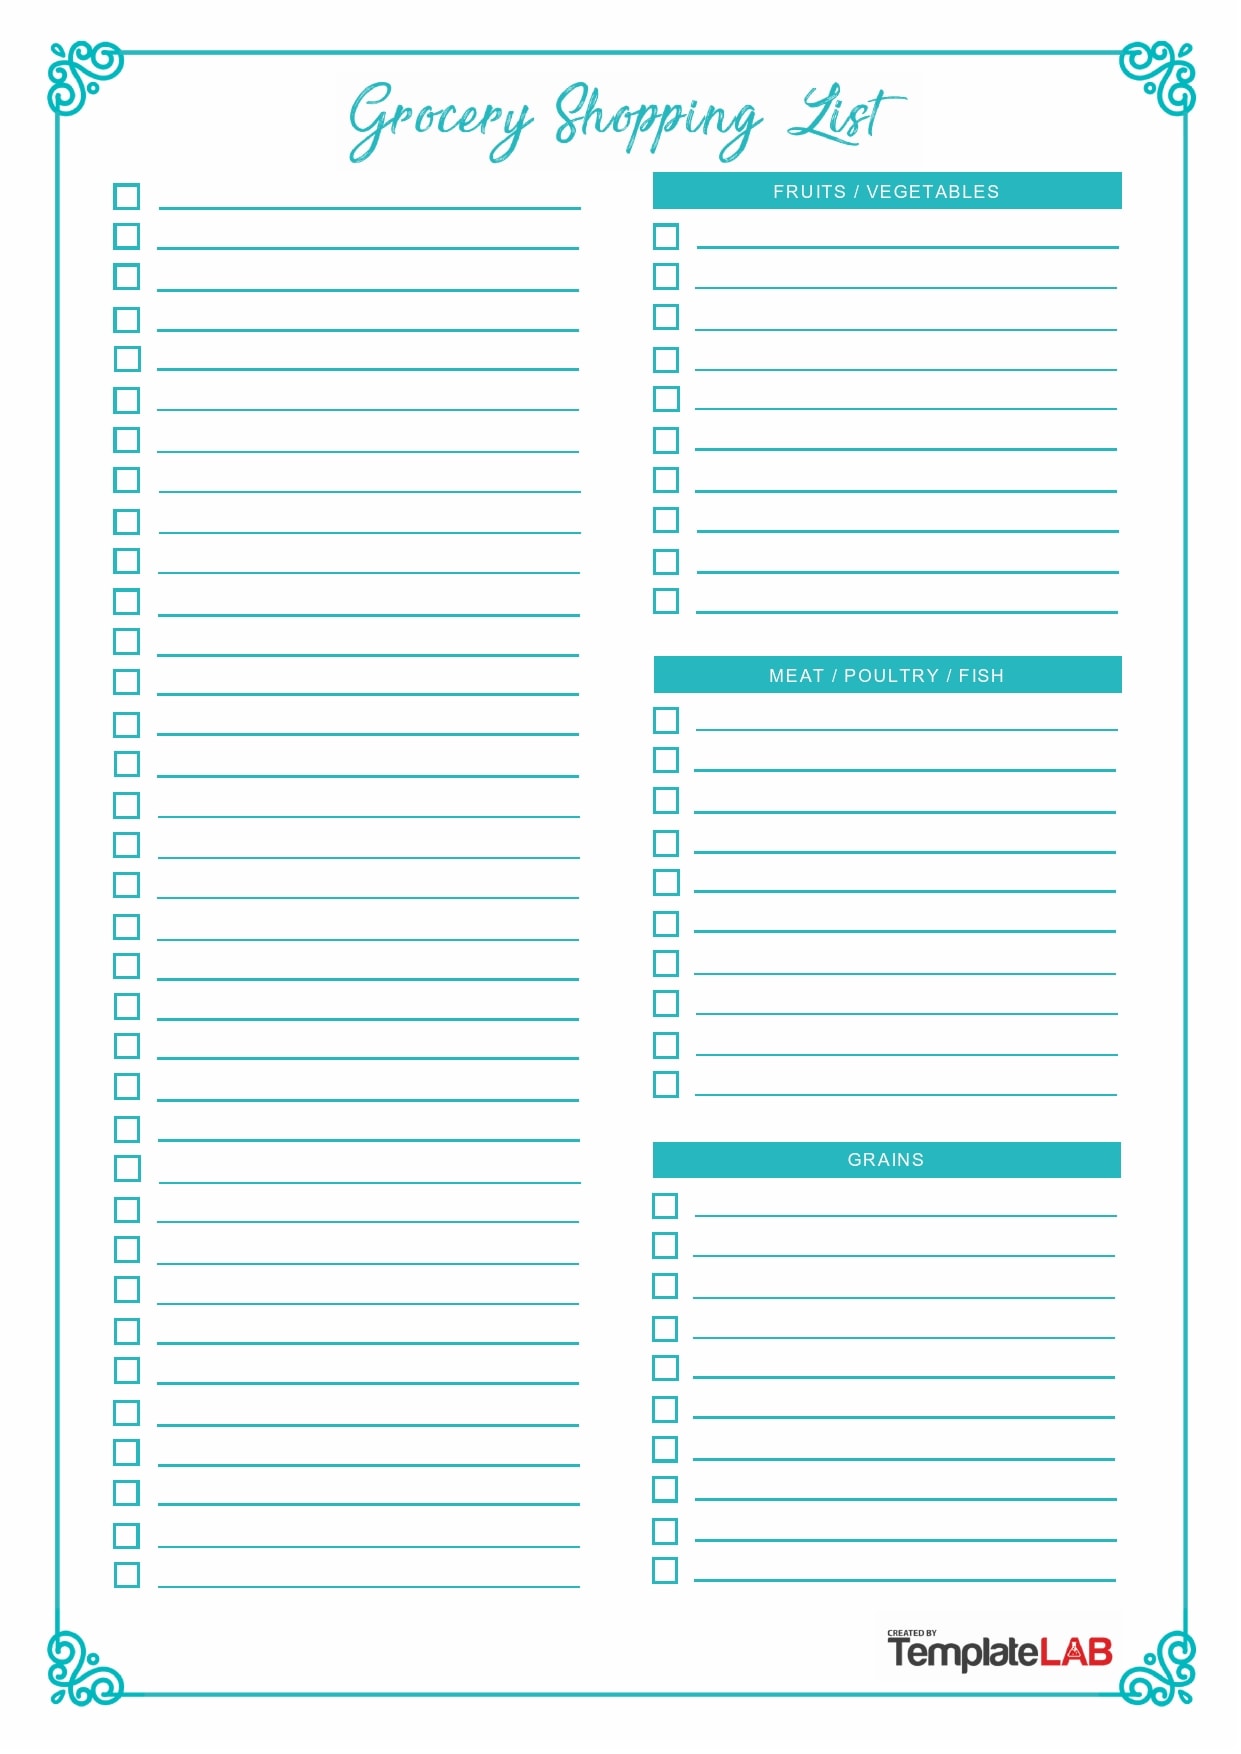 Printable Shopping List For Groceries